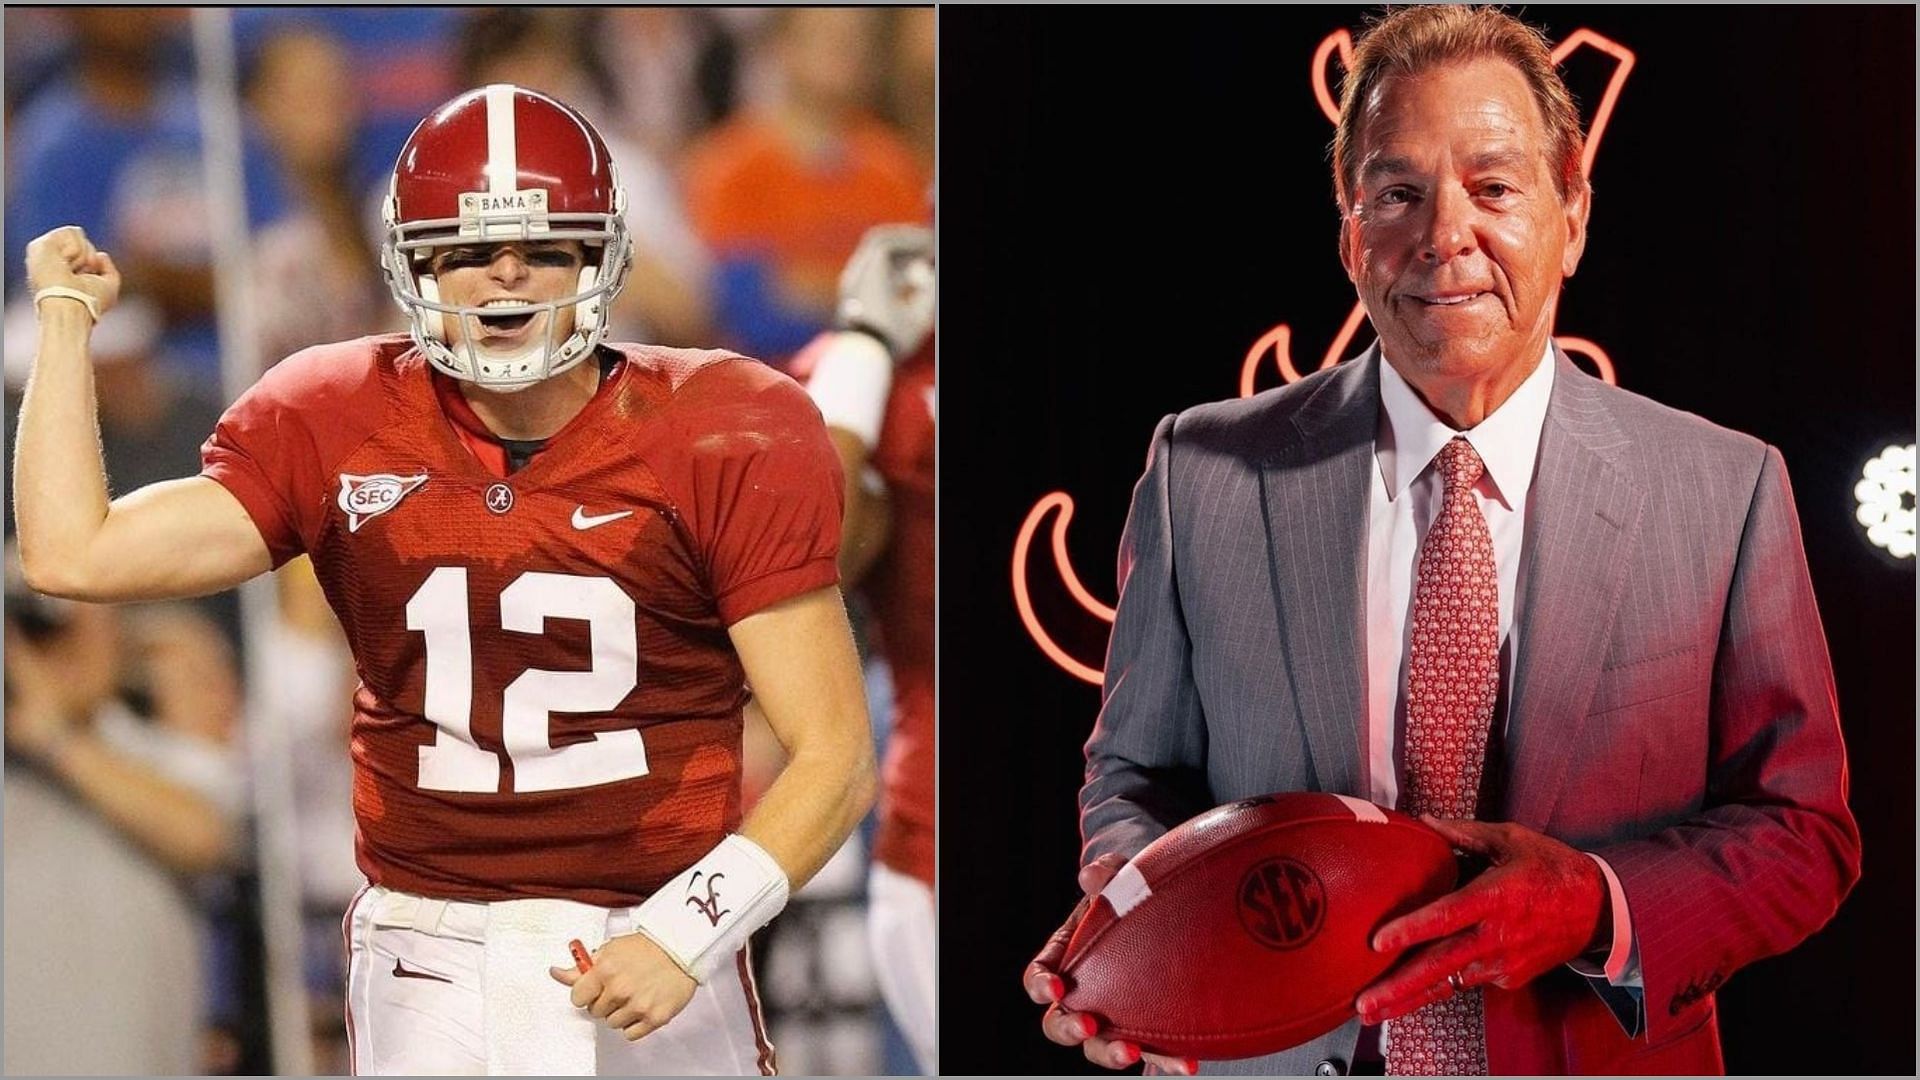 Nick Saban was fueled by the 2088 loss to the Gators, according to McElroy